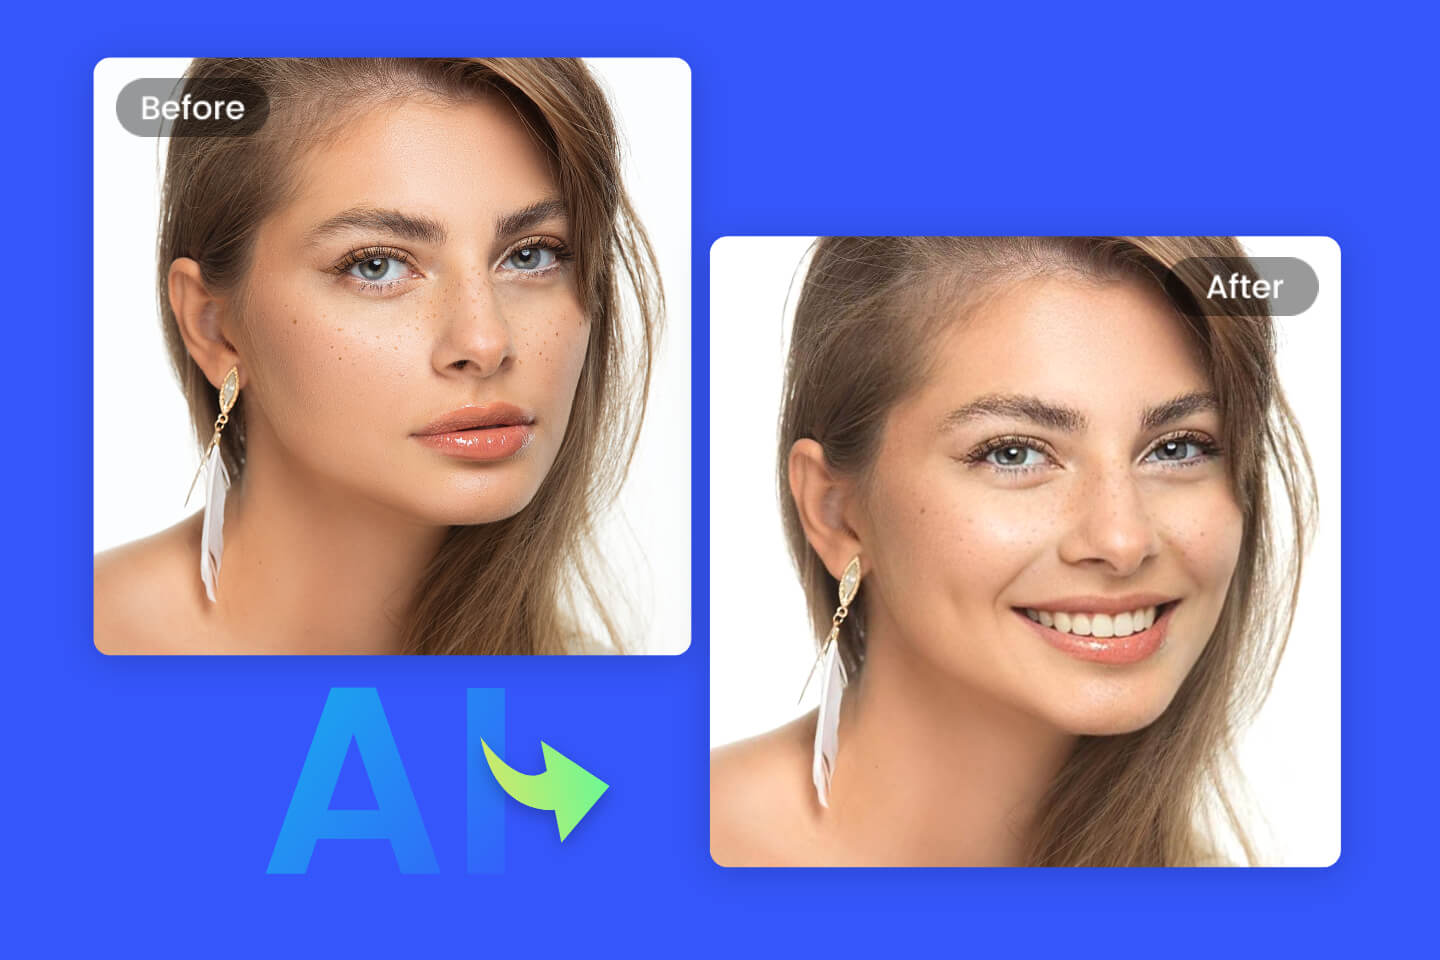 Use Fotor AI smile filyer to change the expression of a woman from serious to smiling